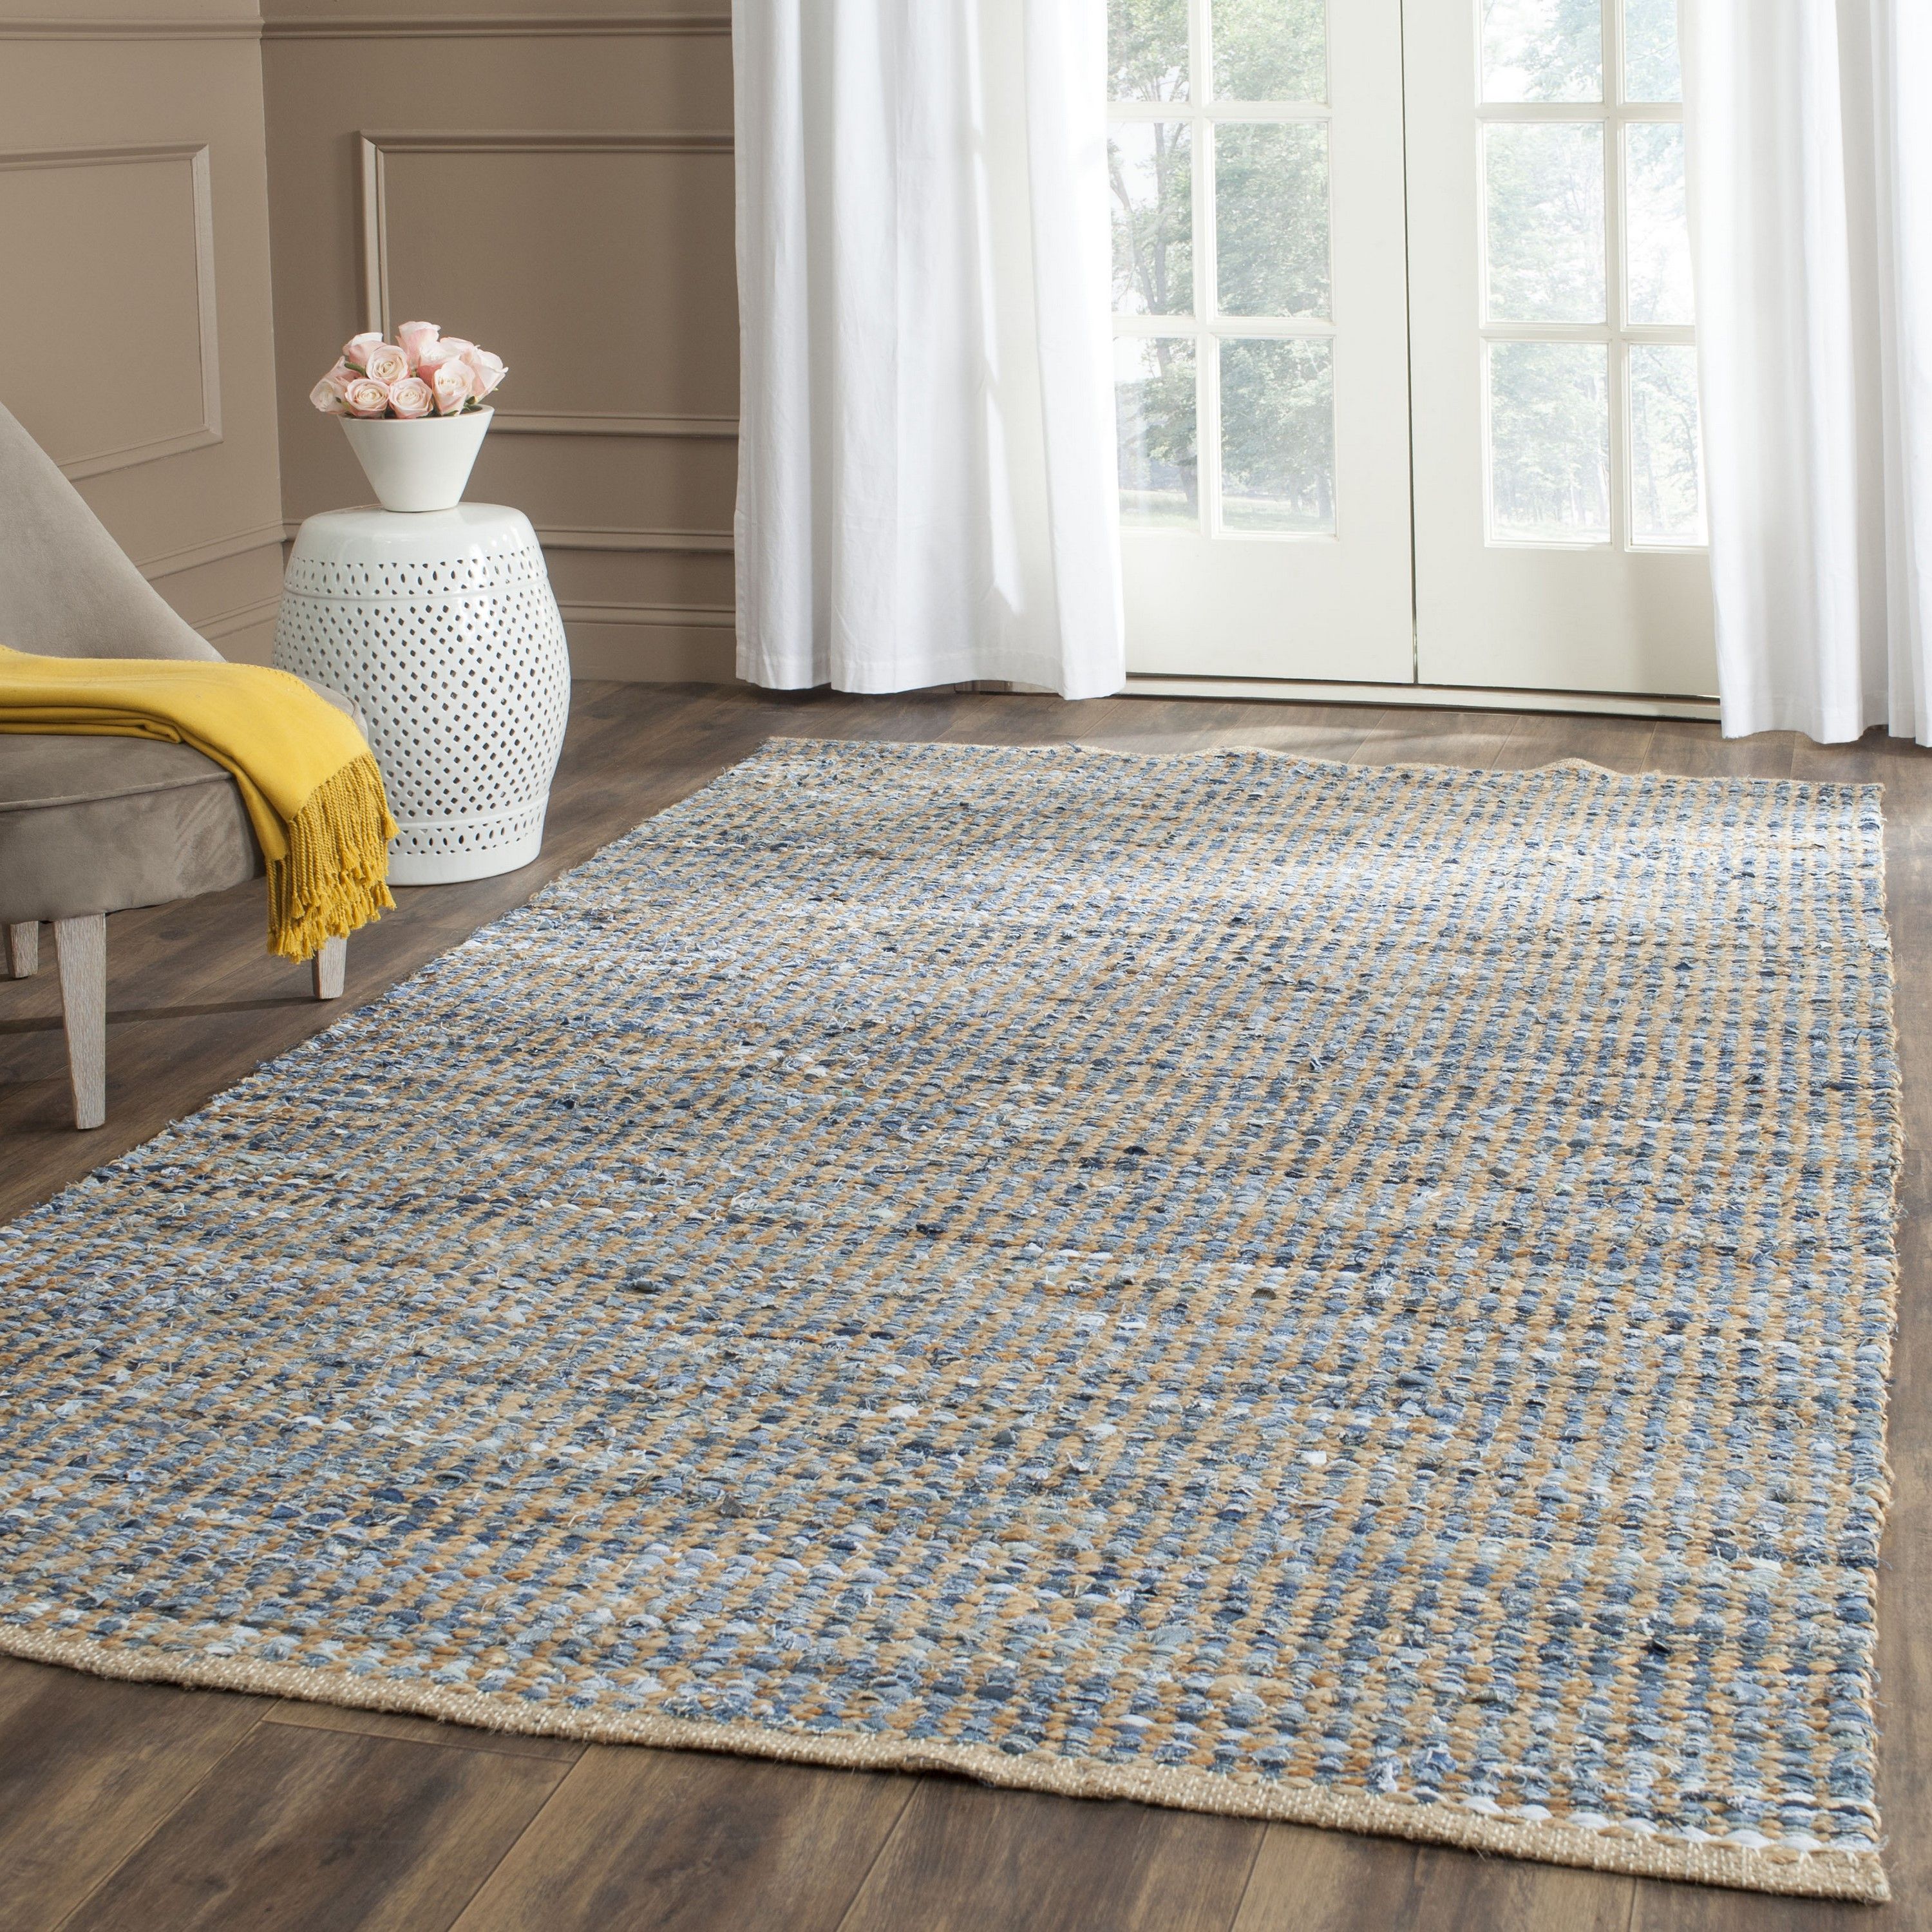 Safavieh 4 X 6 Jute Natural/blue Indoor Stripe Coastal Area Rug In The Rugs  Department At Lowes With Coastal Indoor Rugs (View 6 of 15)